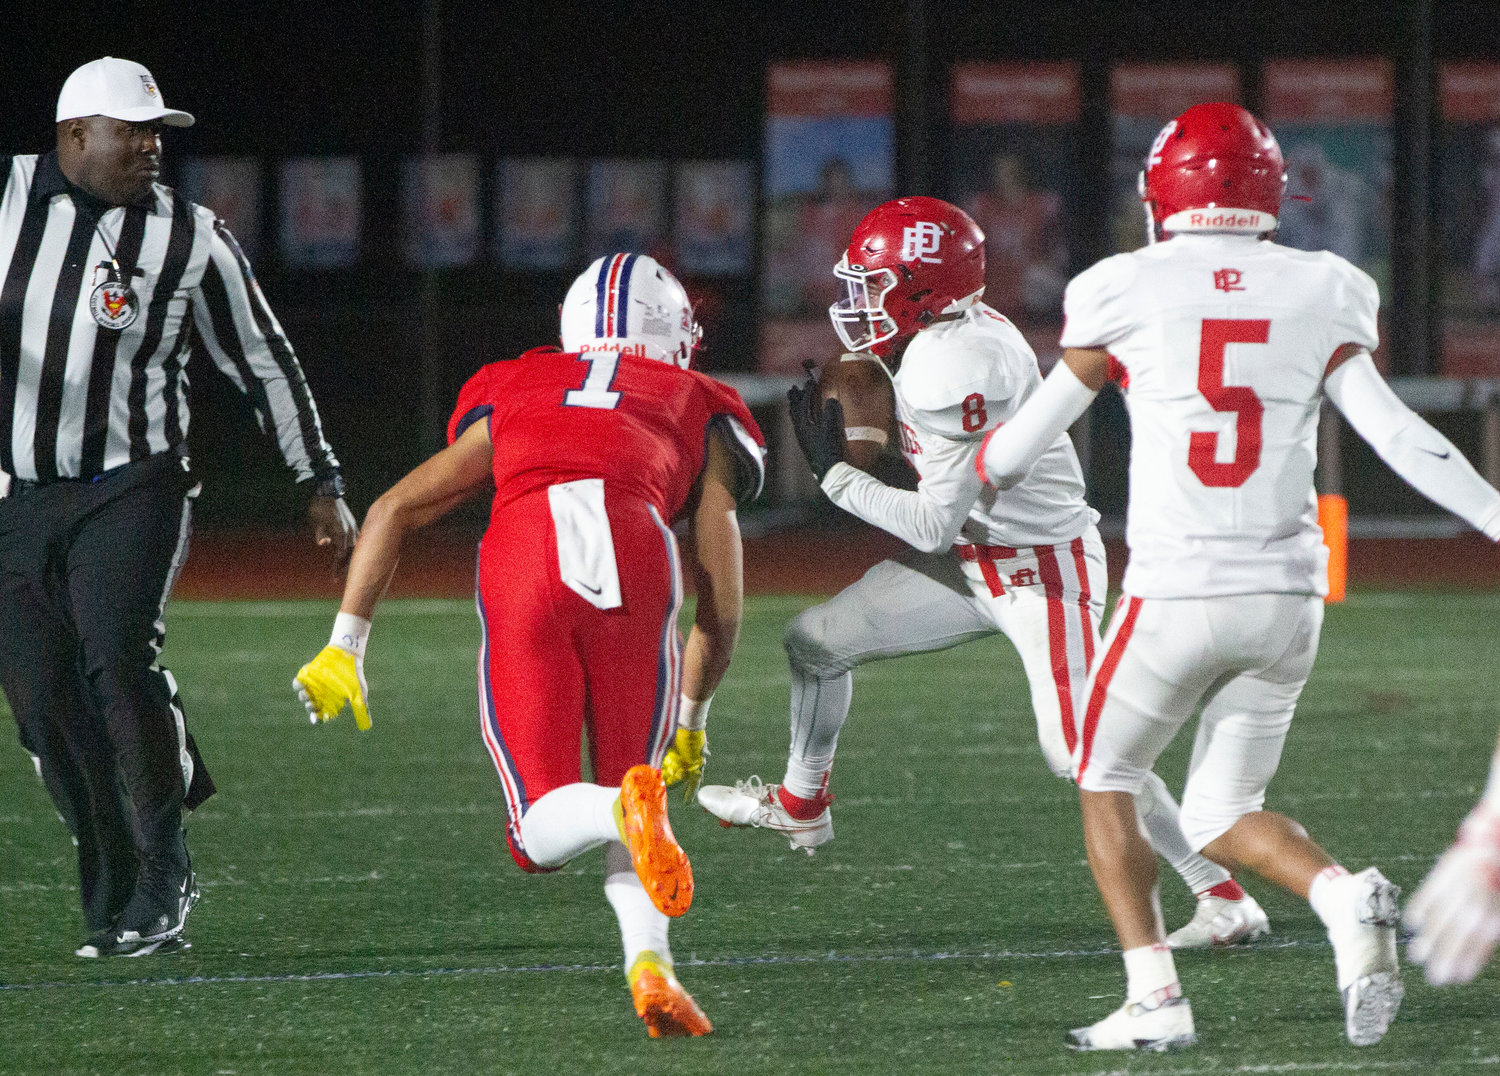 Jahad Davis Pinto recovers a fumble for the Townies in their playoff game against the Patriots.